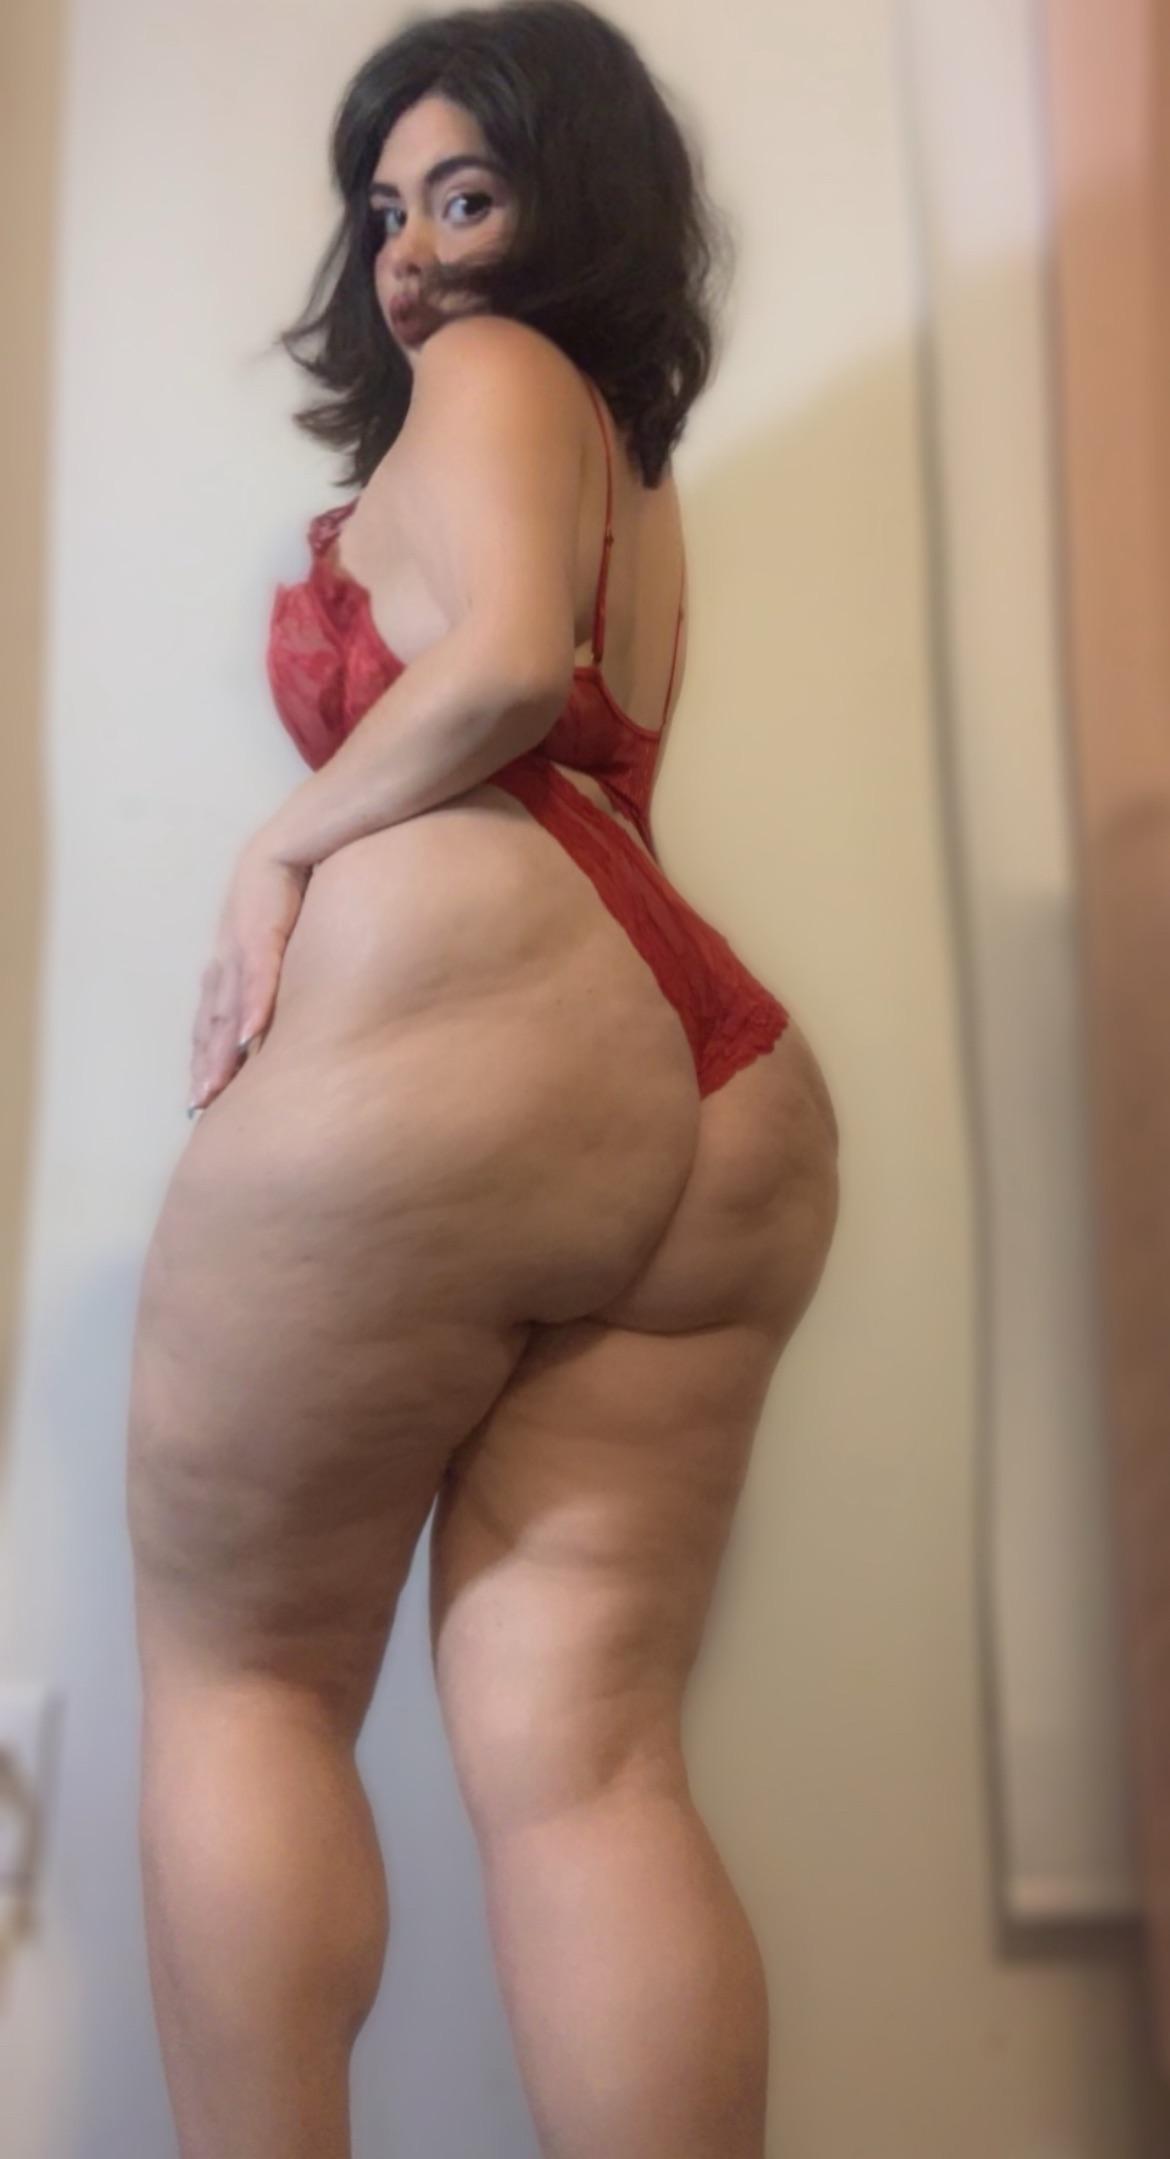 Thicker Come get naughty with me